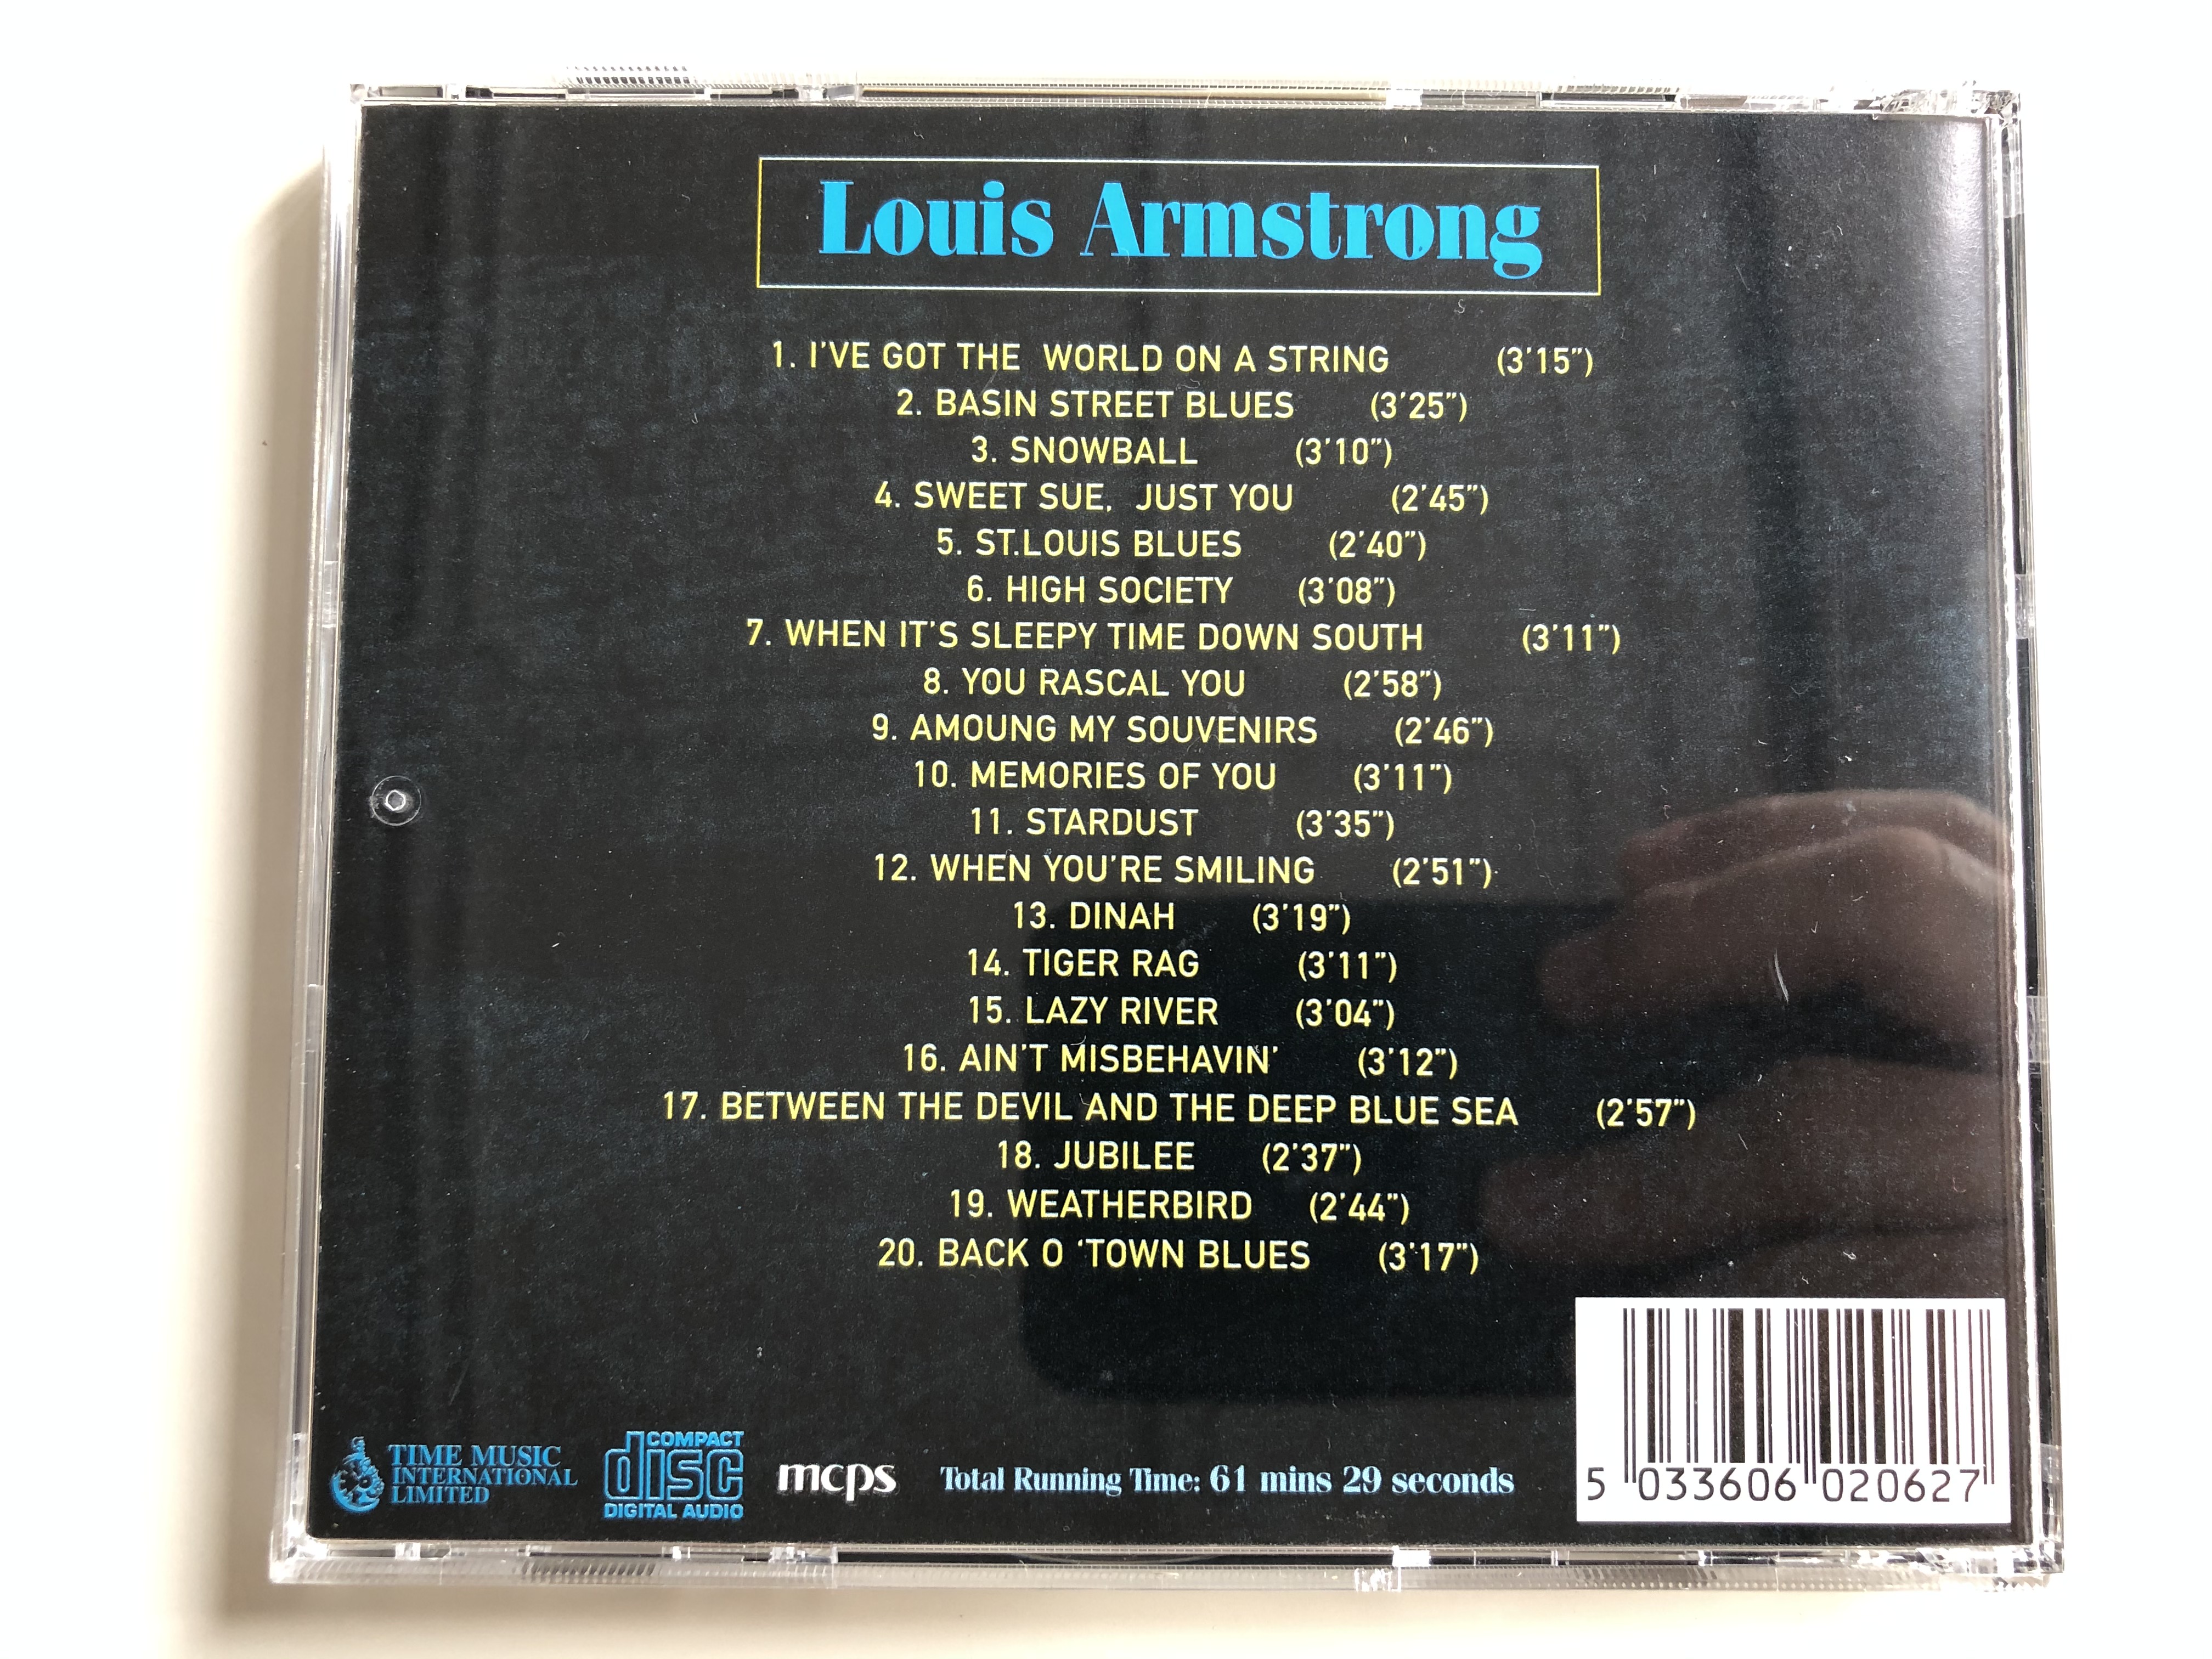 louis-armstrong-featuring-i-ve-got-the-world-on-a-string-basin-street-blues-st-louis-blues-time-music-international-limited-audio-cd-1997-tmi206-4-.jpg